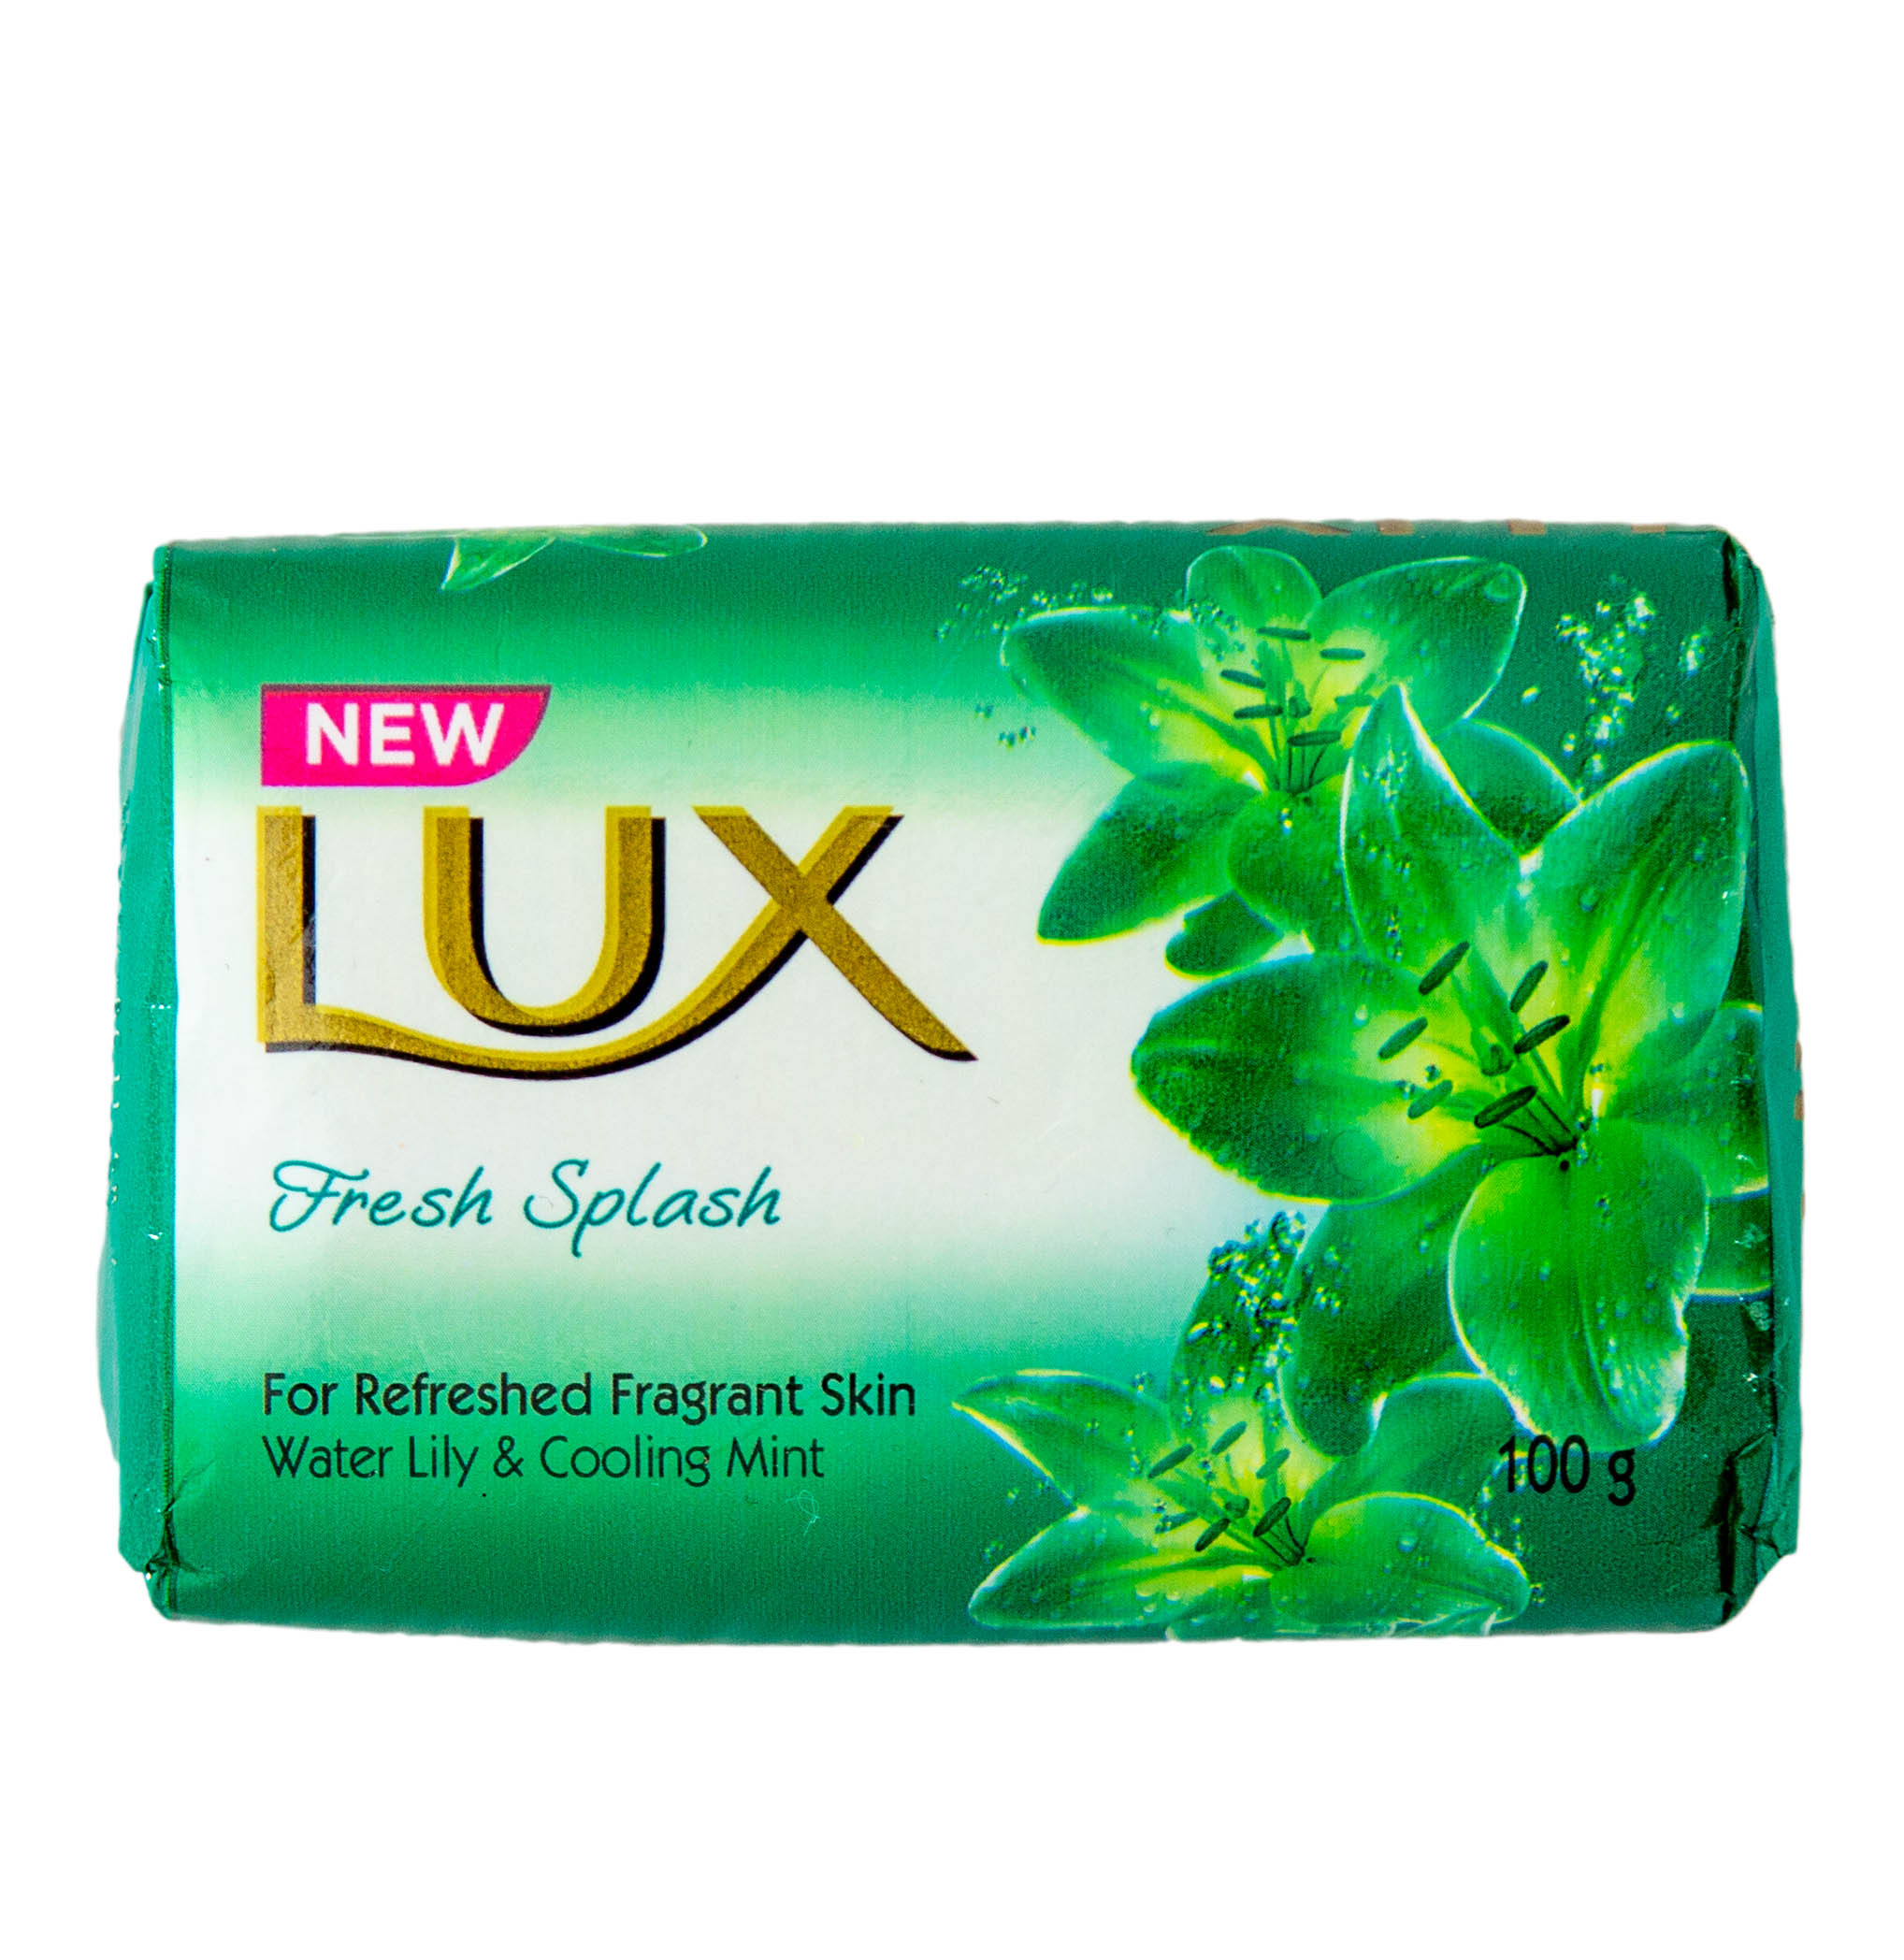 Lux - Fresh Splash Soap with water lily & cooling mint - 100g